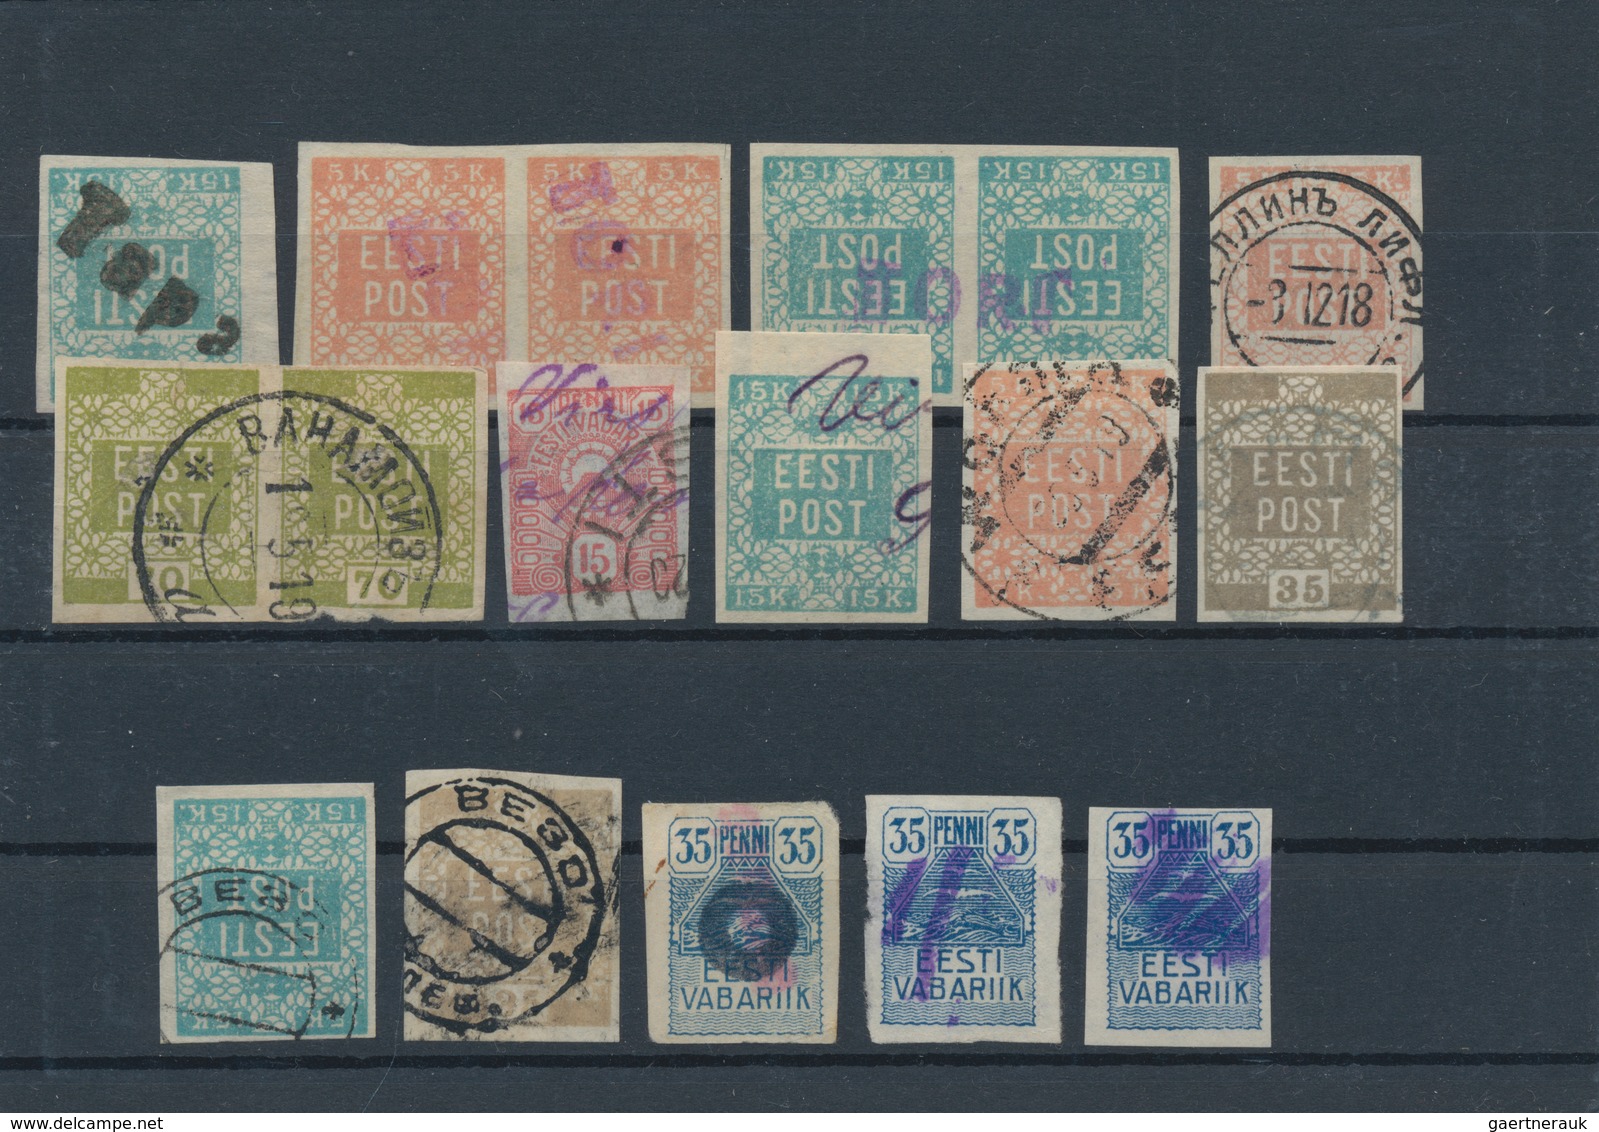 Estland: 1919 - 1920, 47 Stamps With 23 Different Provisional Cancellations. - Estonia